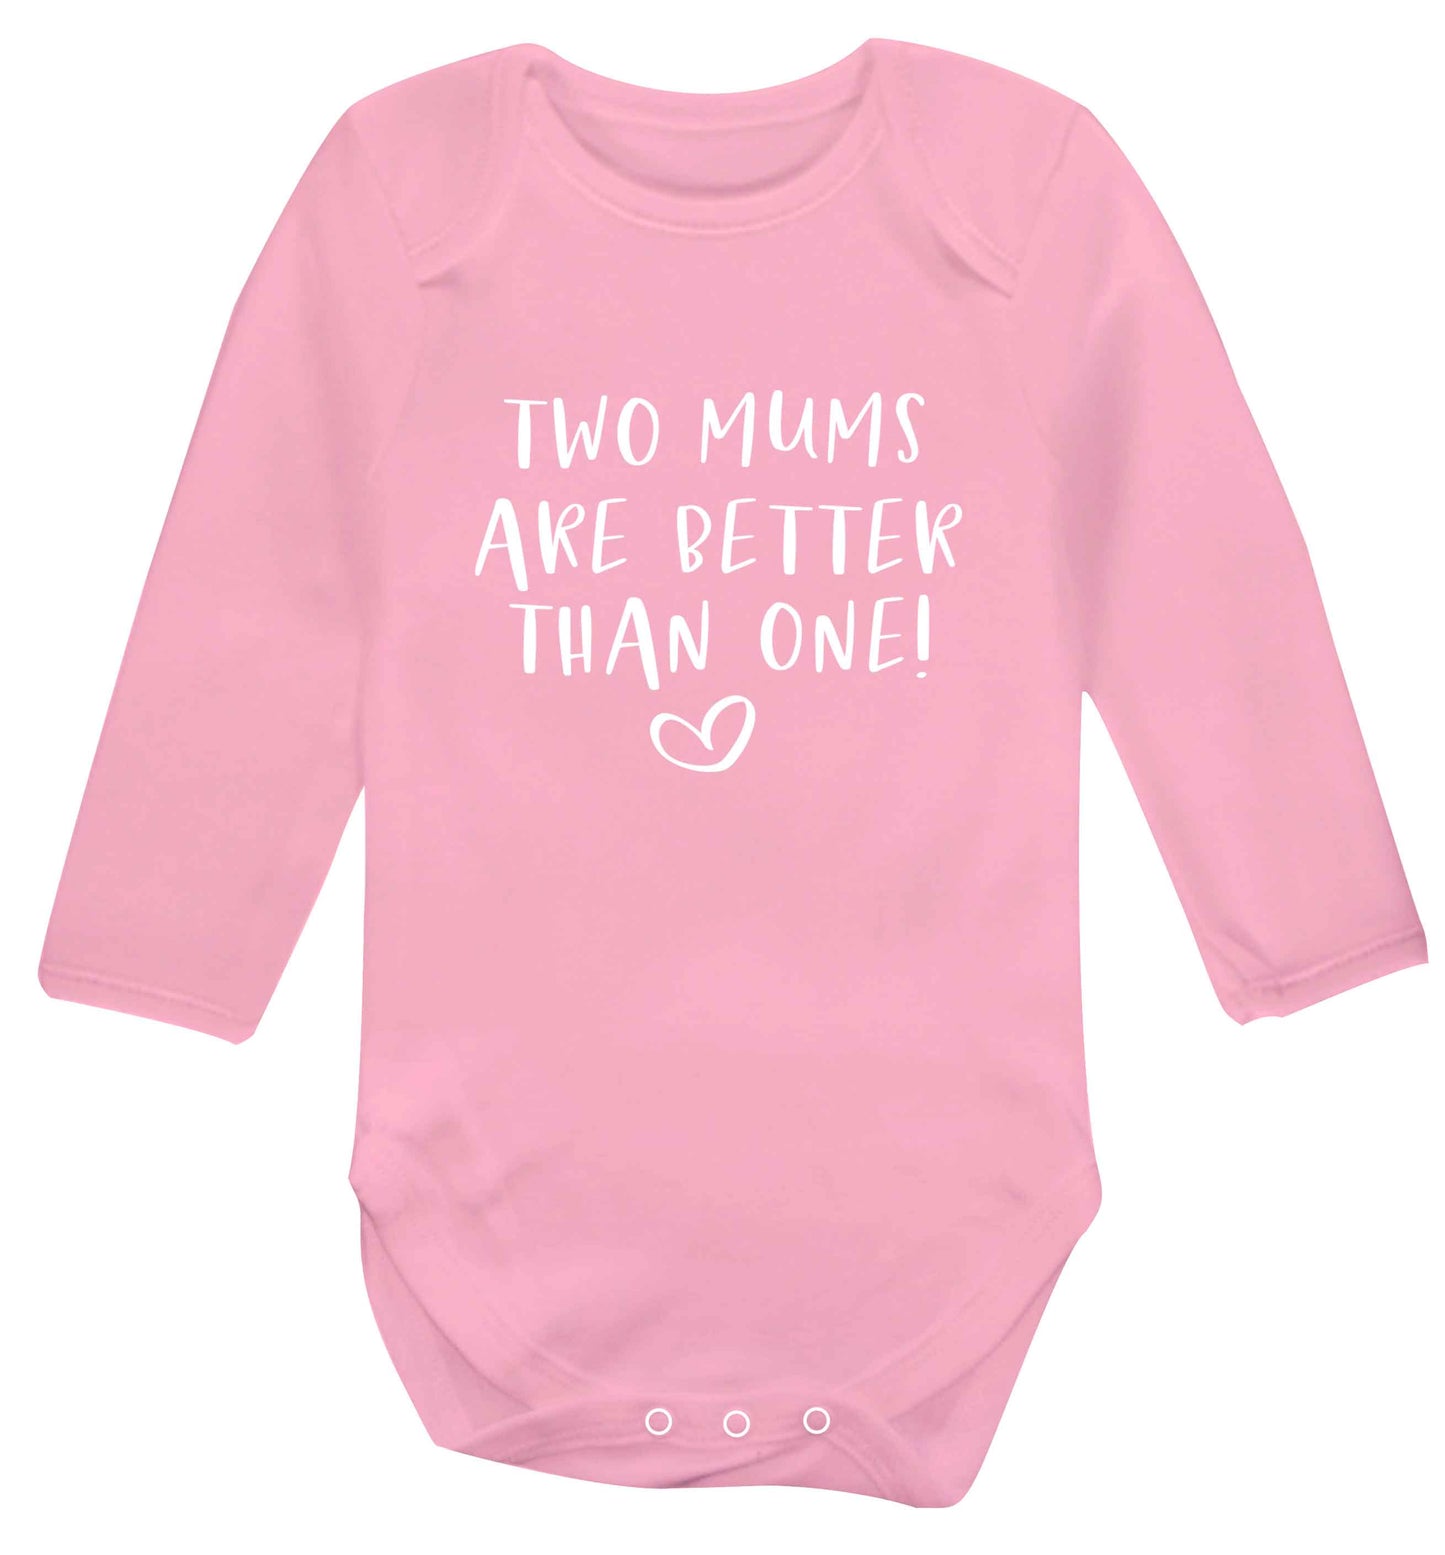 Two mums are better than one baby vest long sleeved pale pink 6-12 months